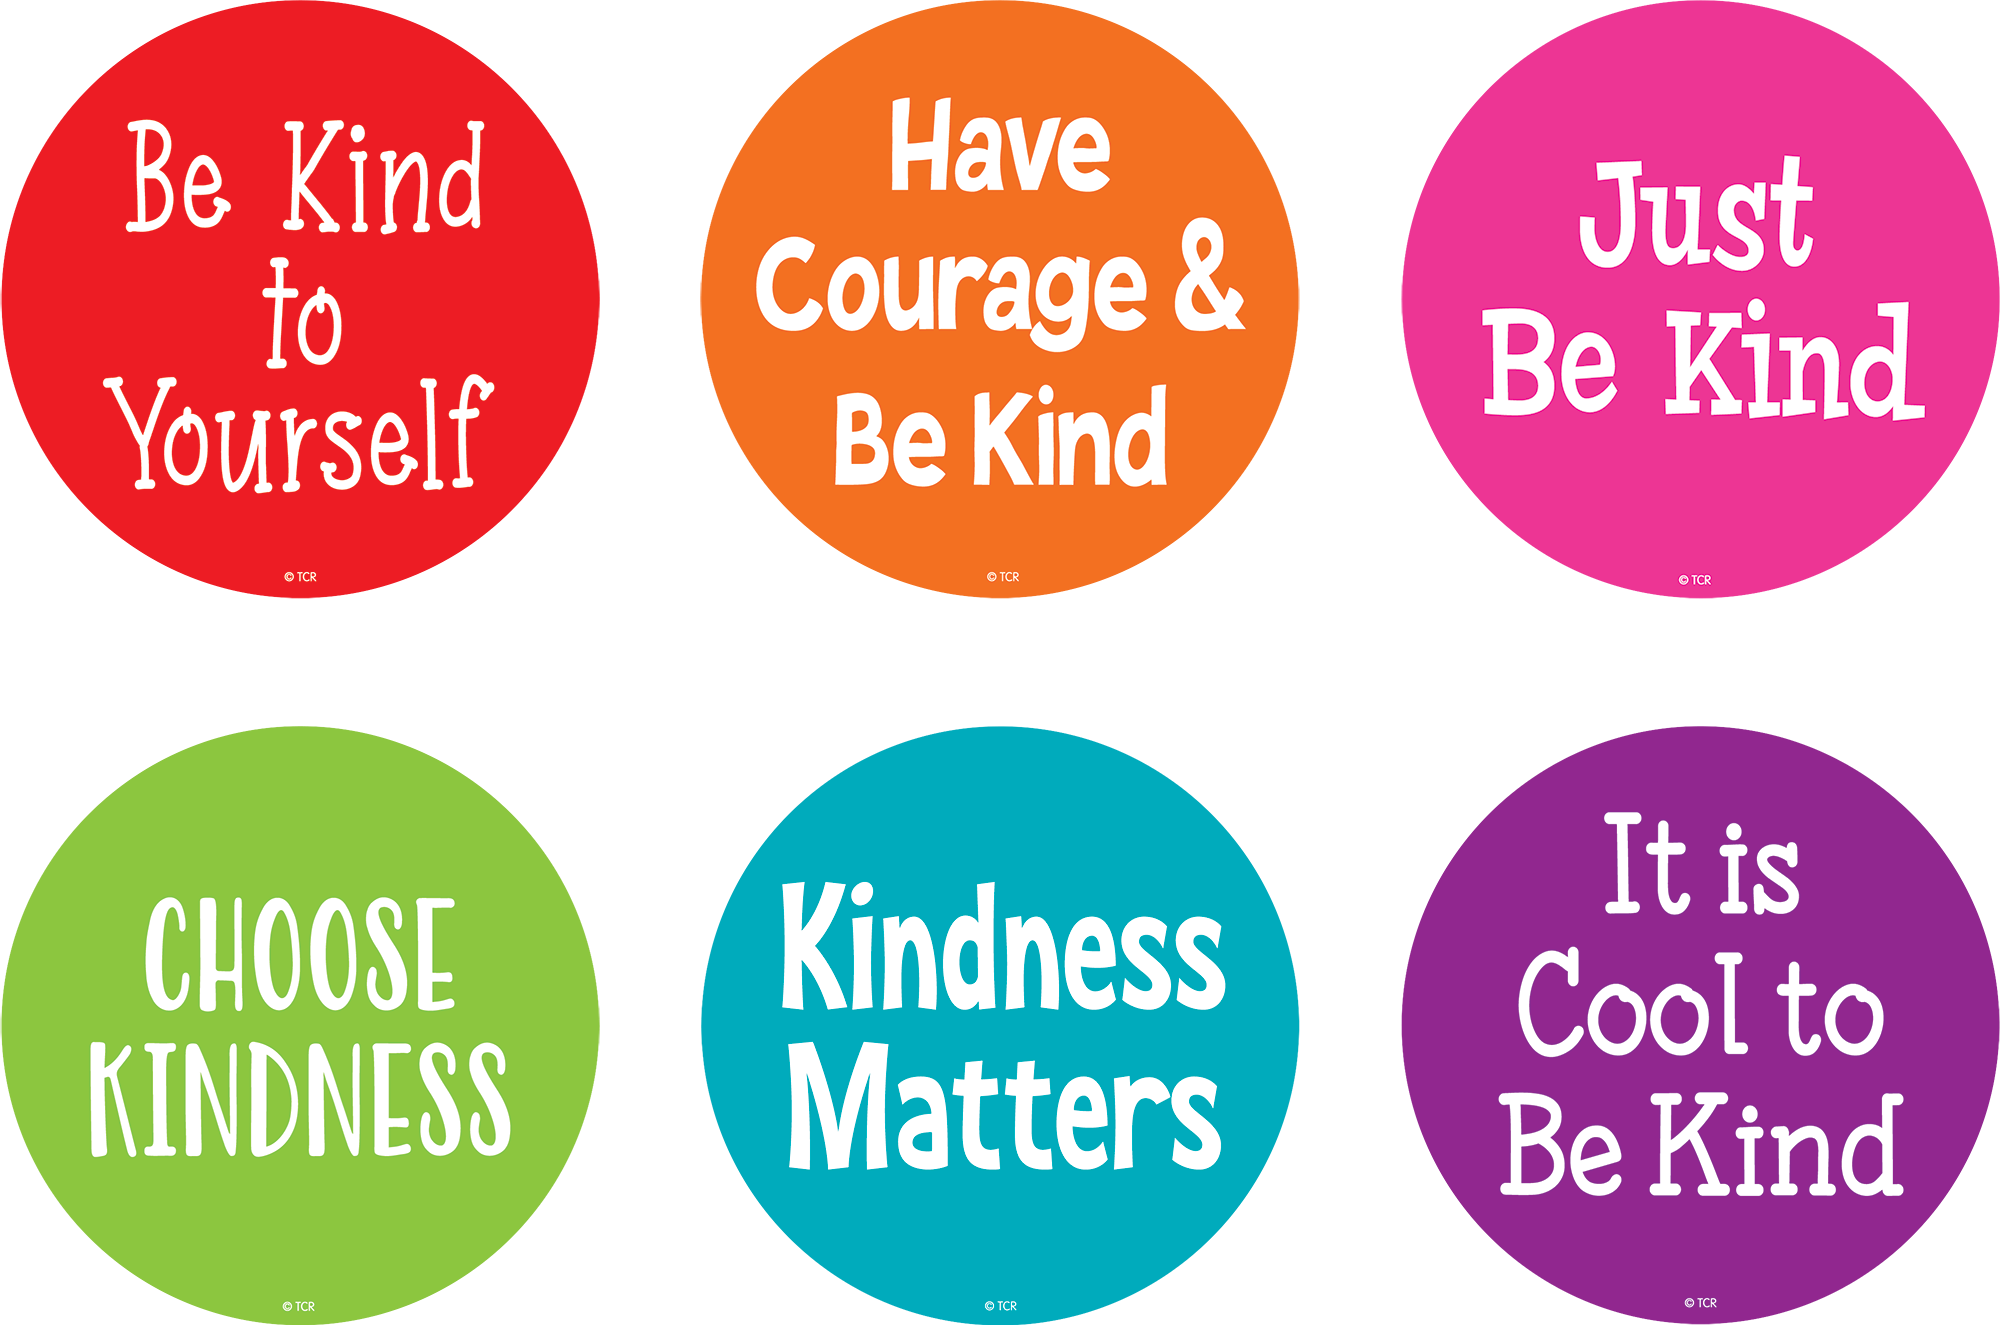 Kindness sayings include: It is Cool to Be Kind, Kindness Begins with Me, Be Kind Be Brave Be You, Have Courage & Be Kind, Be Kind to Yourself, Kindness Matters, Human•Kind Be Both, Just Be Kind, Choose Kindness, Kindness is Free, Practice Kindness, Kindness over Everything